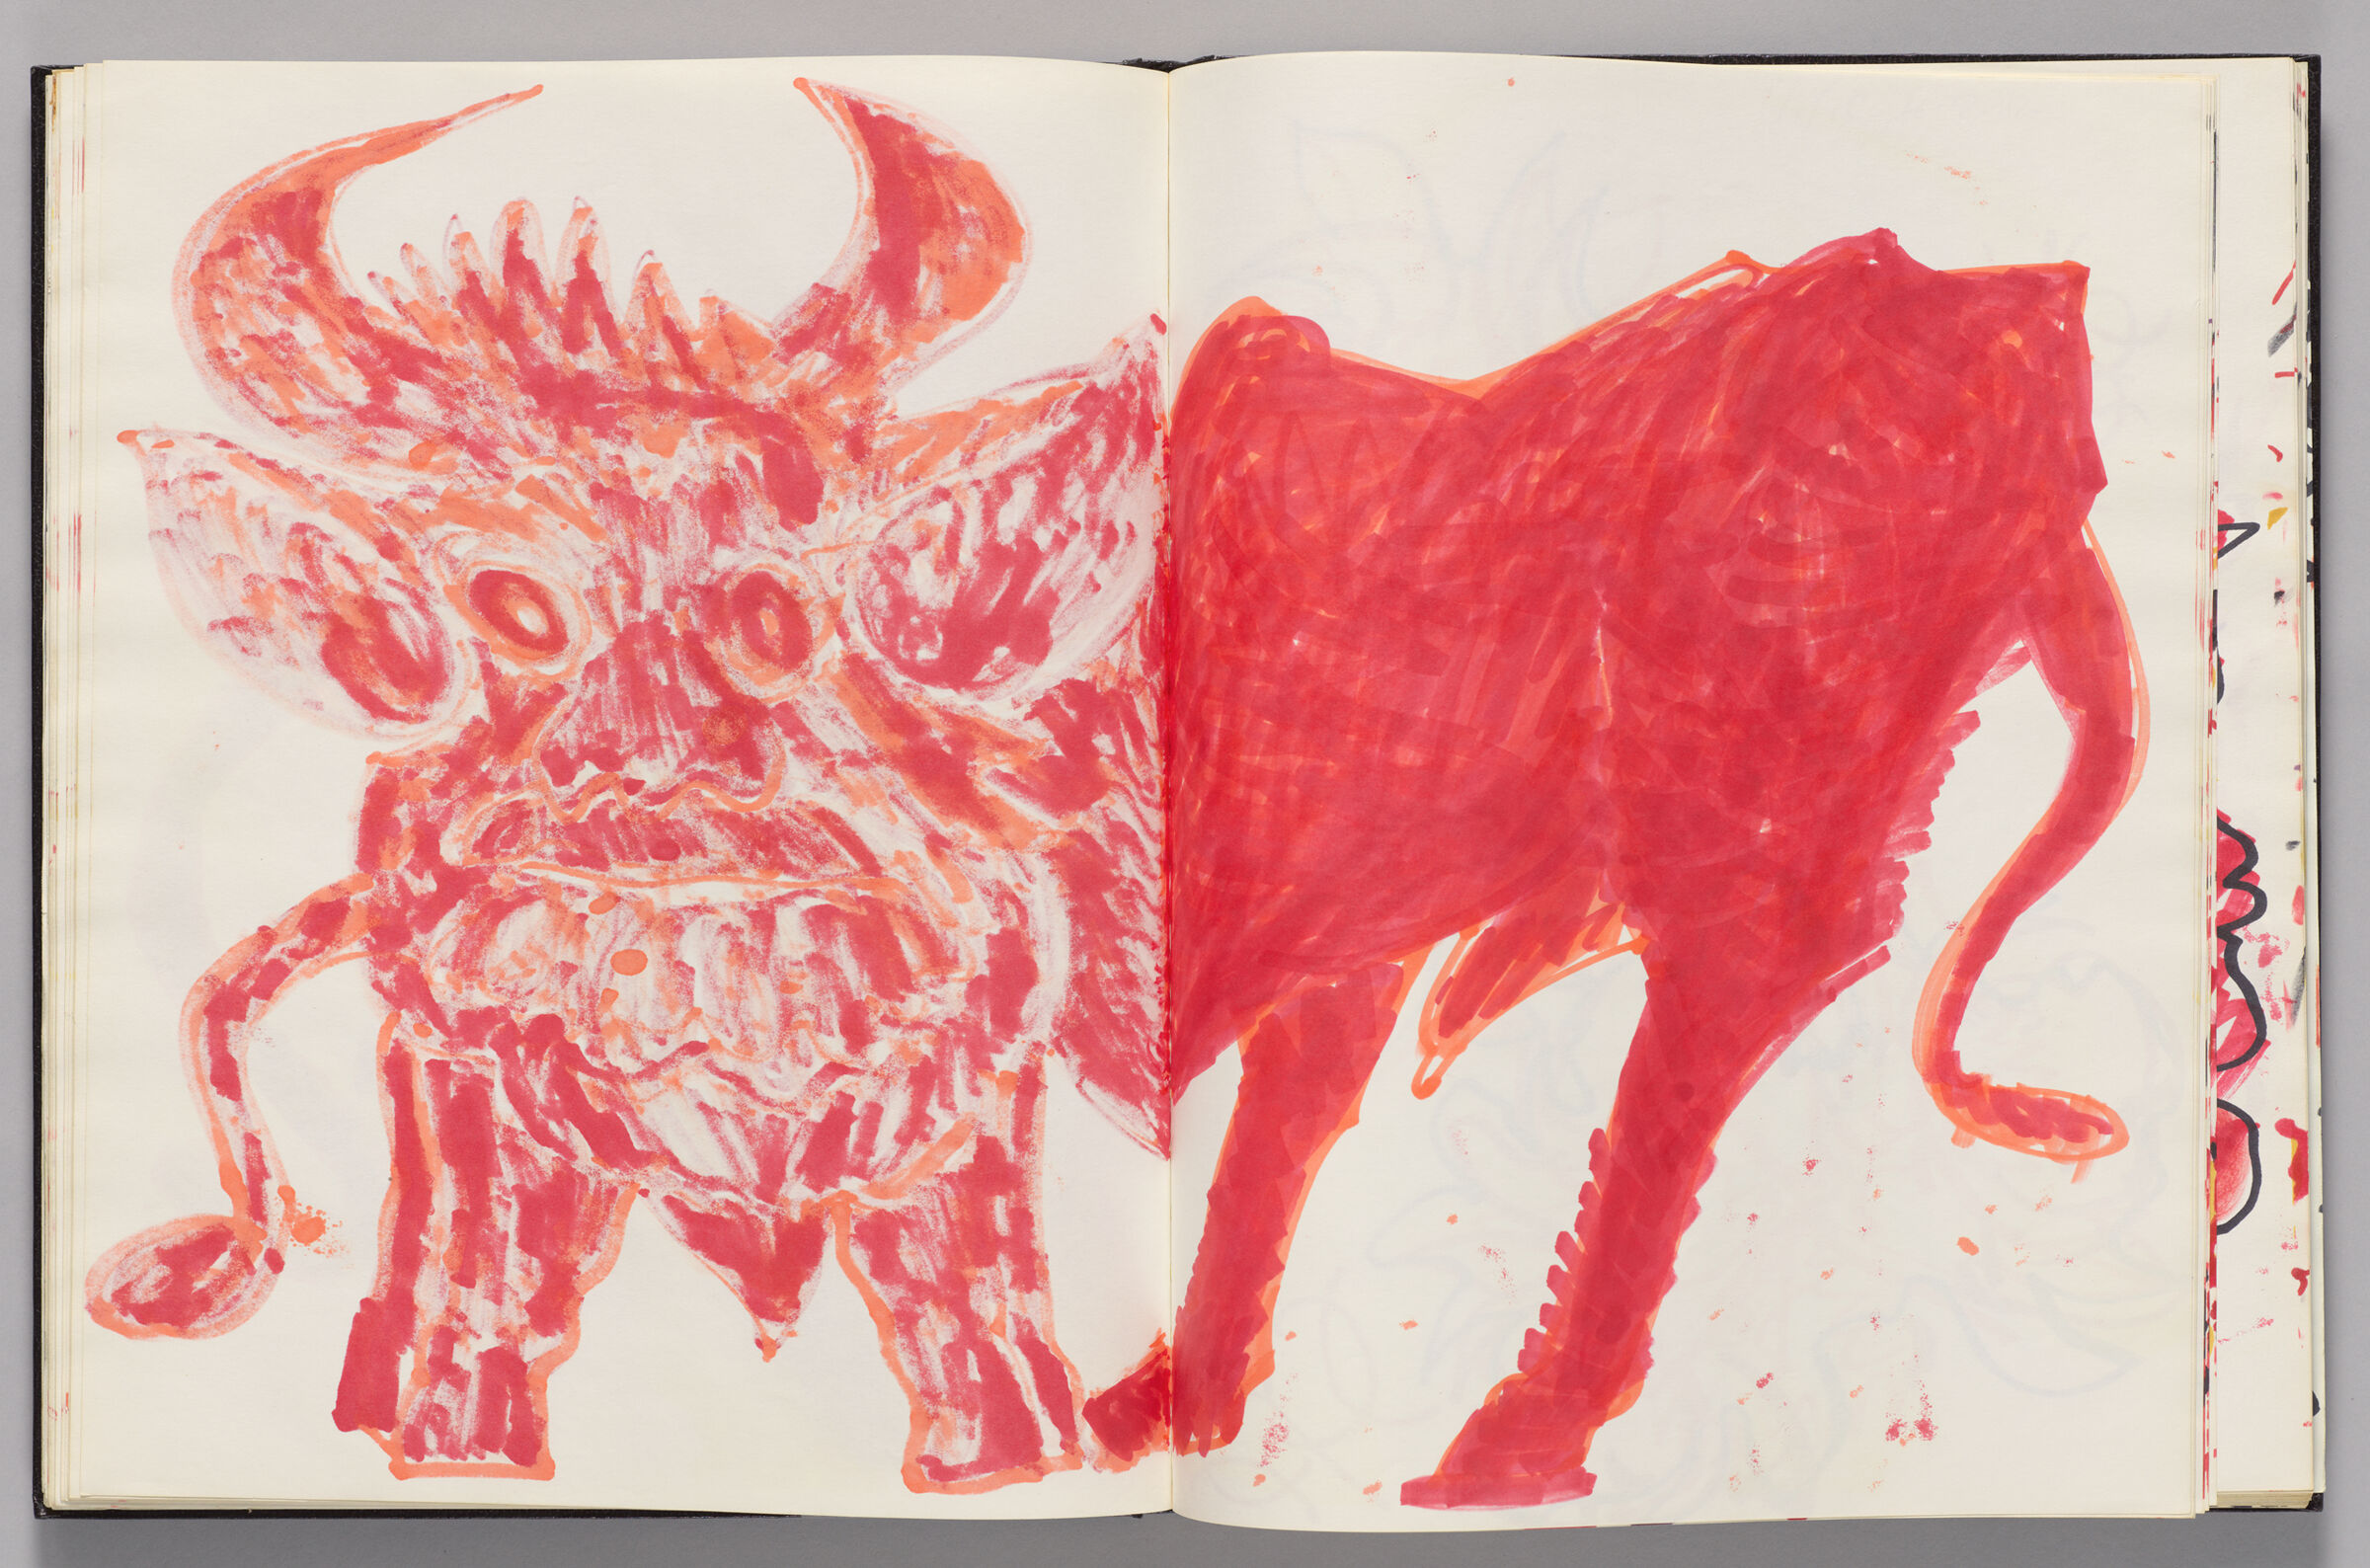 Untitled (Bleed-Through Of Minotaur Head Connected To Minotaur Body, Two-Page Spread)